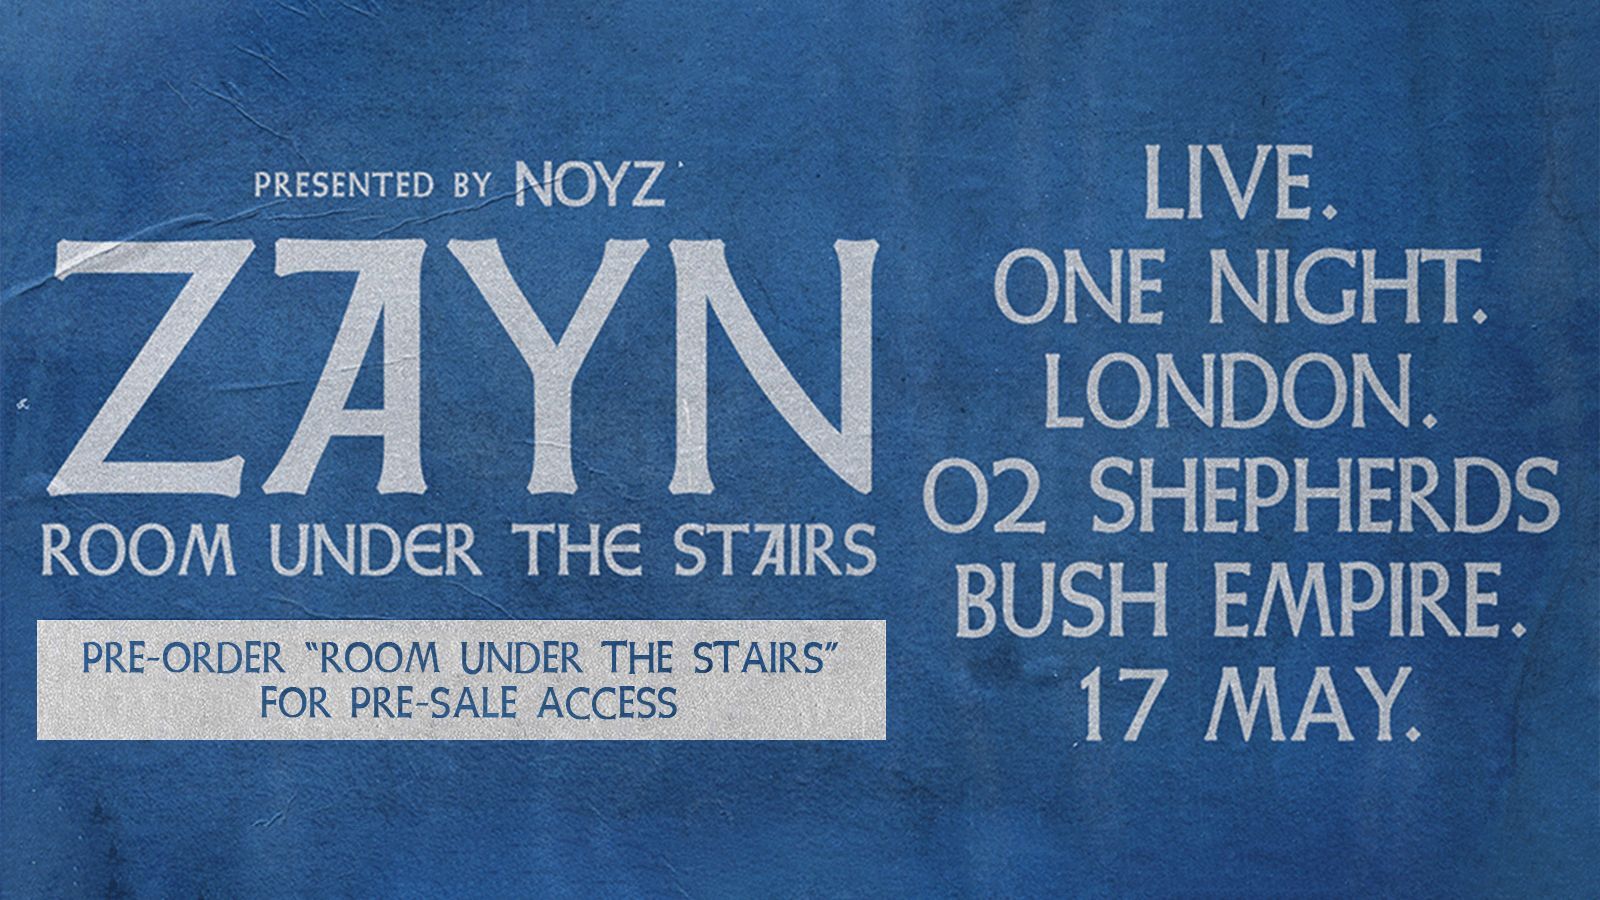 Presented by Noyz Zayn Room Under the Stairs. Pre-Order "Room under the stairs" for pre-sale access. Live. One Night. London. 02 Shepherds Bush Empire. 17 May.